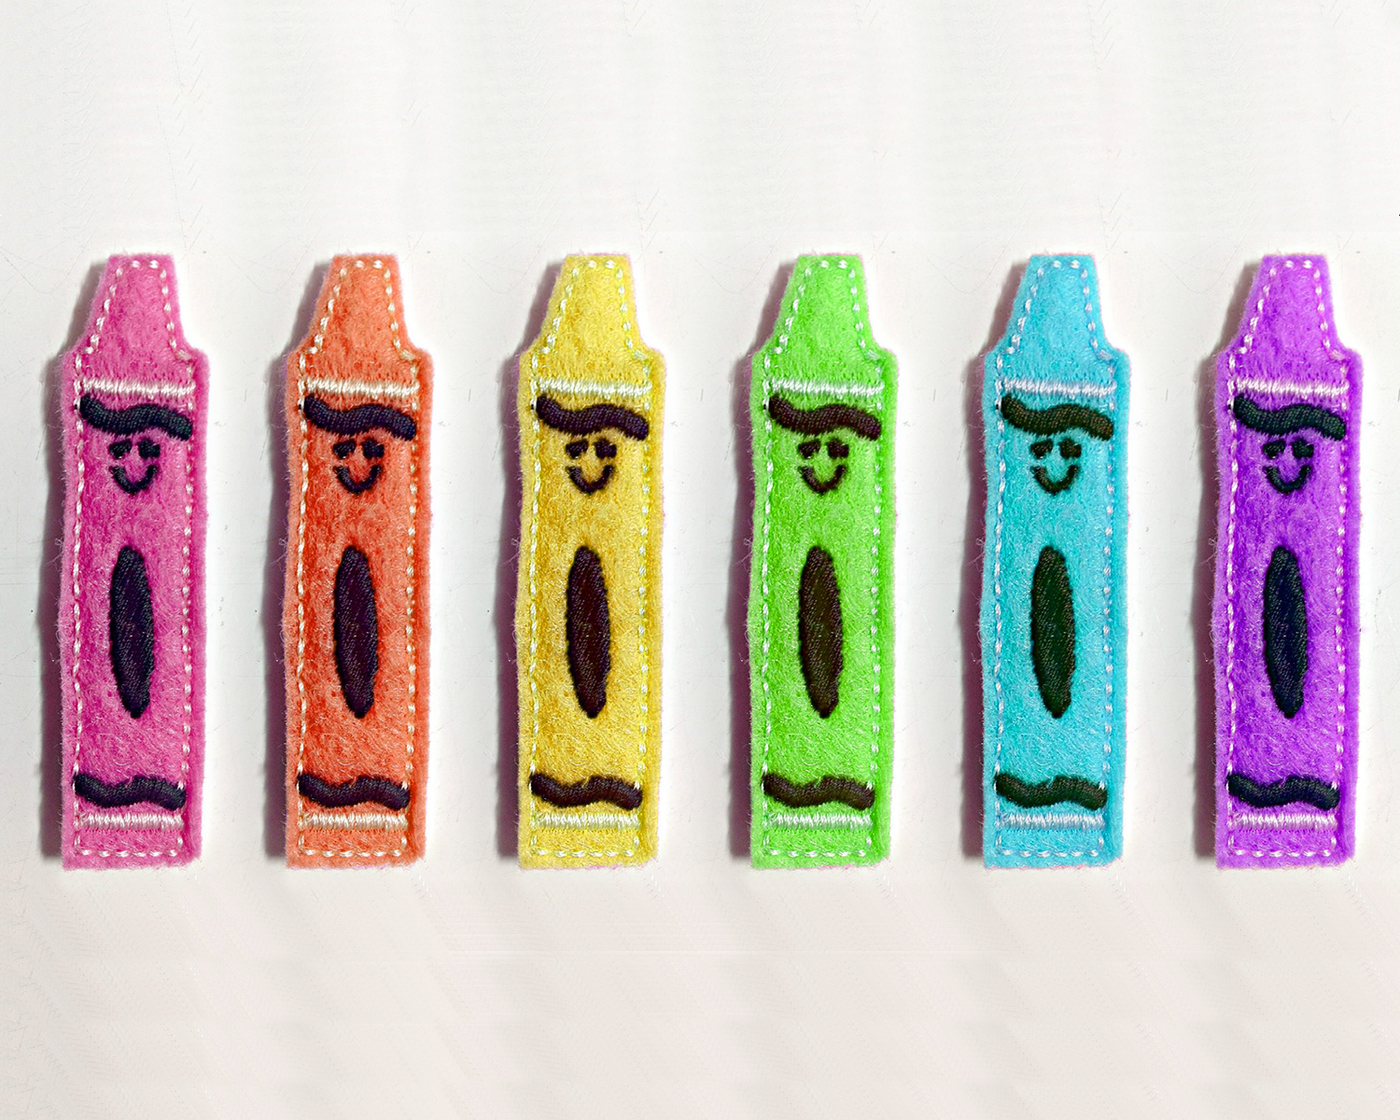 Five smiling crayon felties in a row, each in a different bright color.